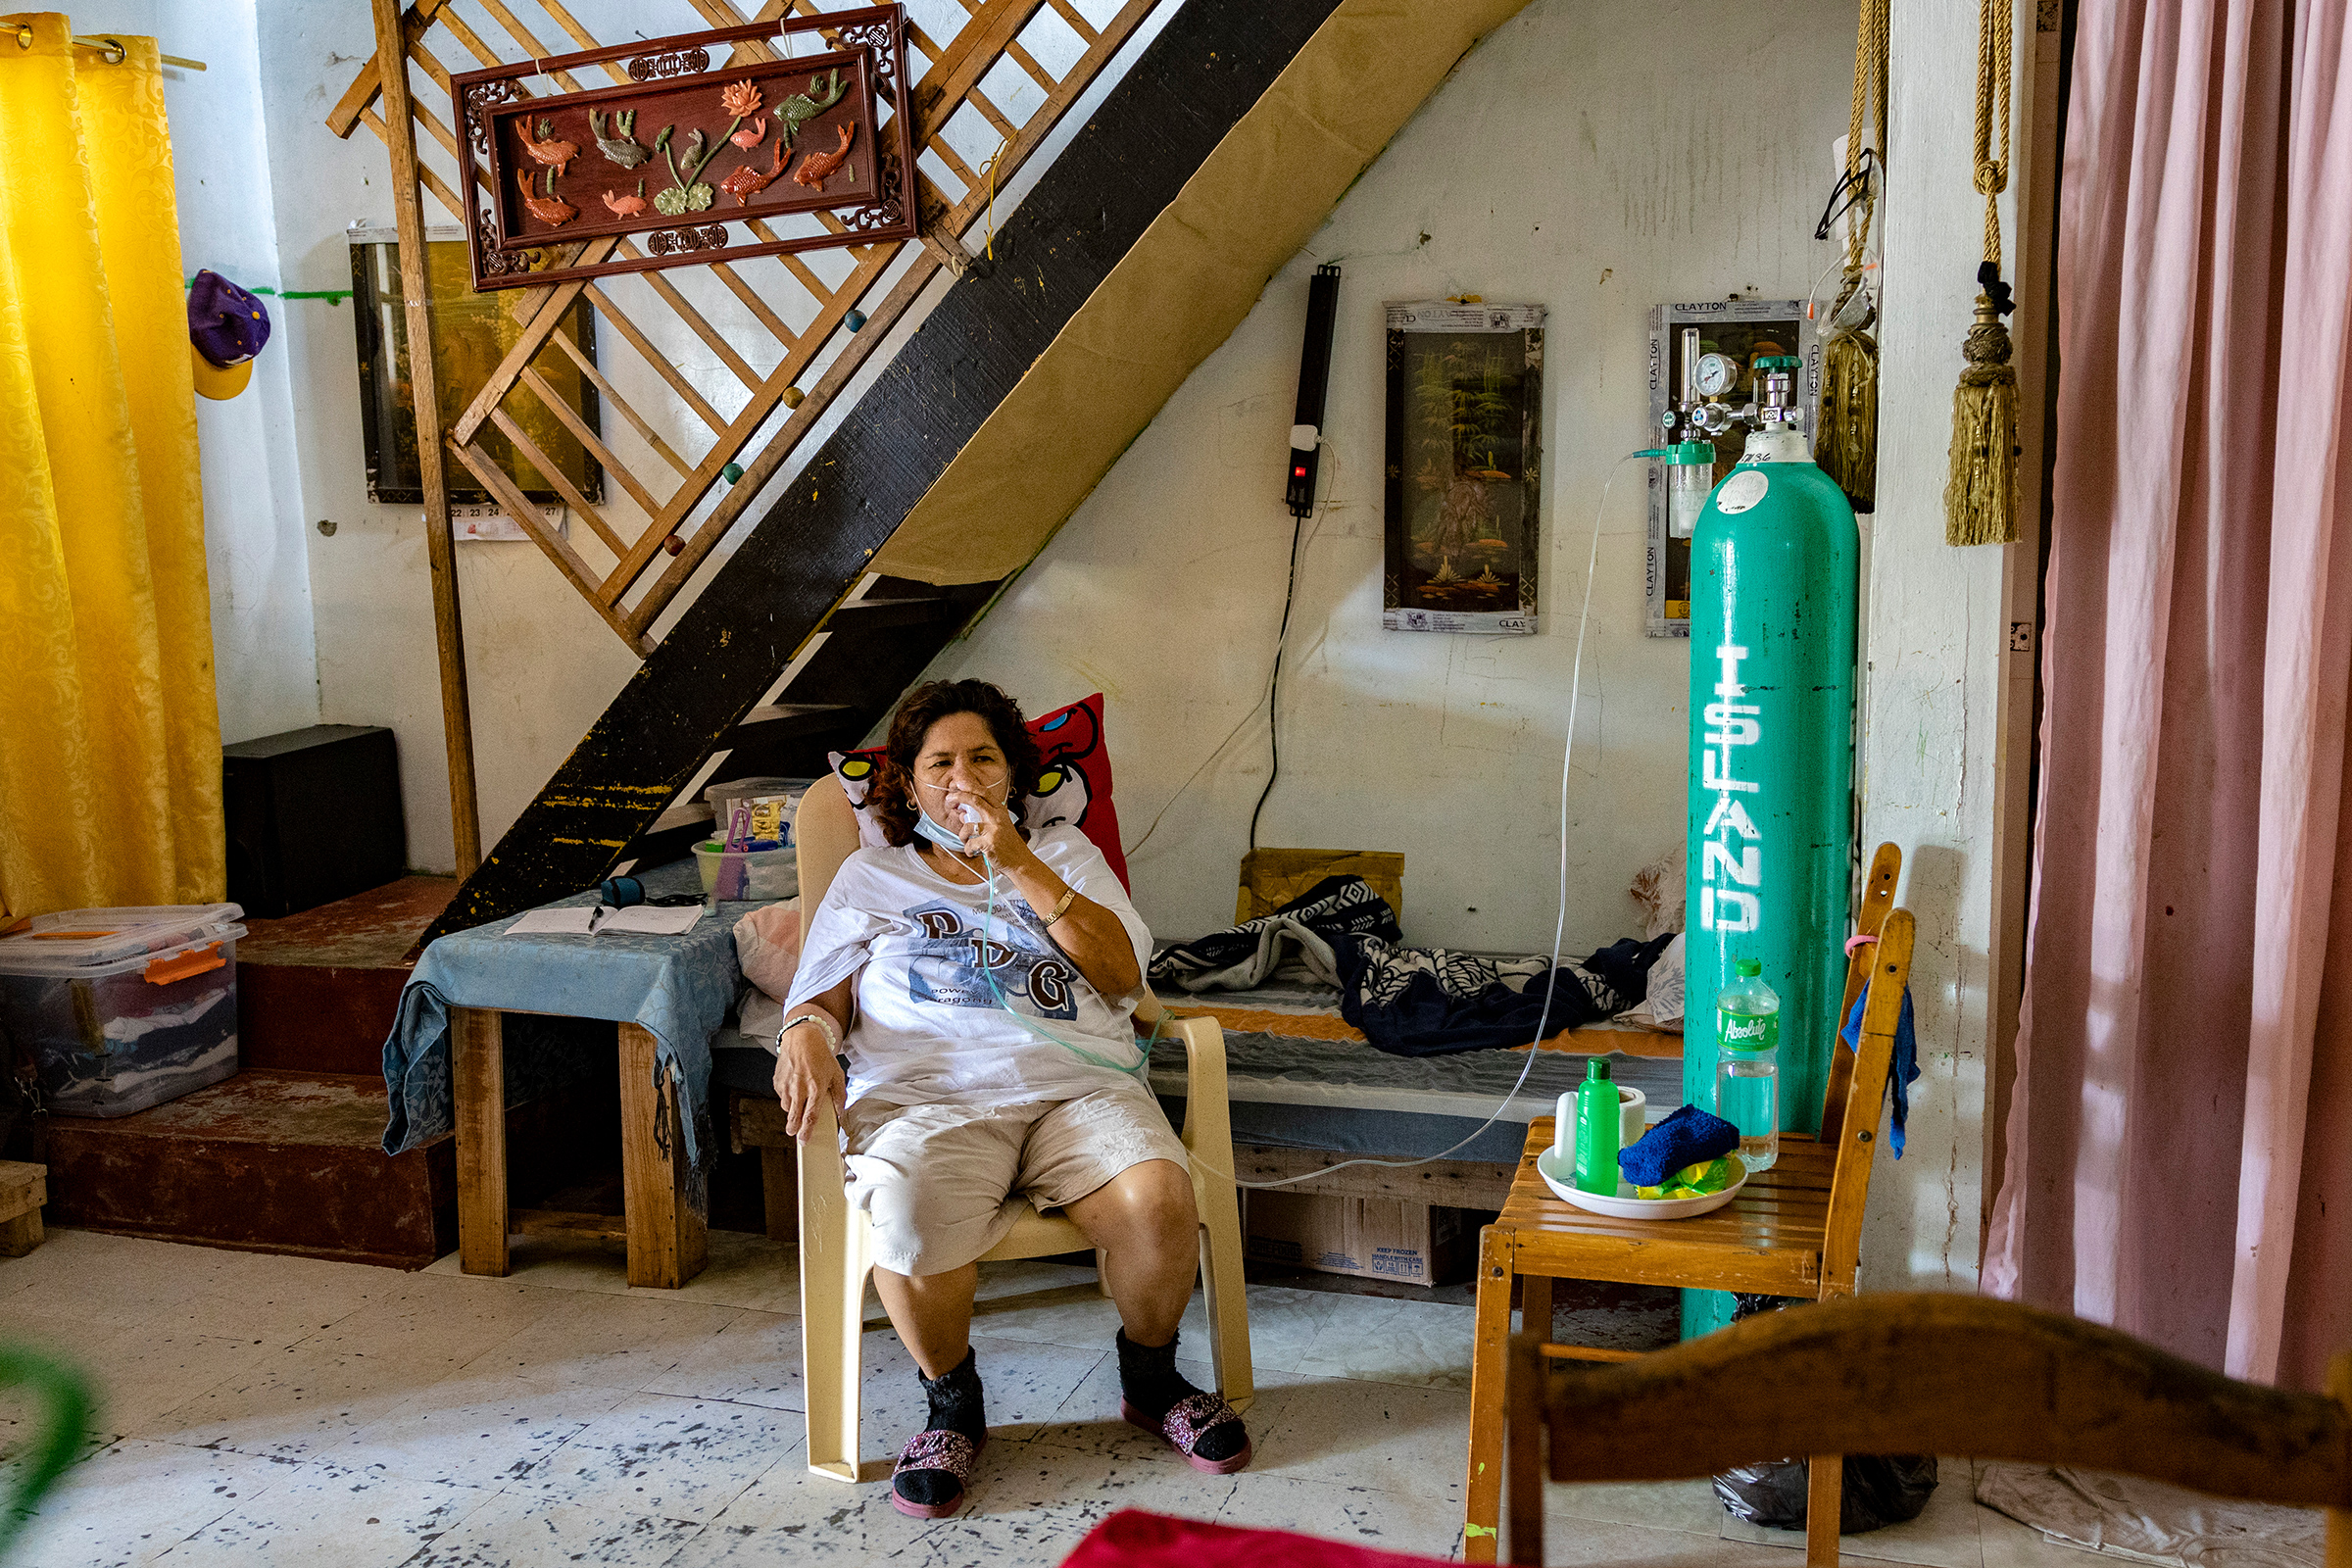 Violeta Bahit, who has COVID-19, breathes with the assistance of an oxygen tank in her home in Lipa, in the province of Batangas, Philippines, on April 9, 2021.